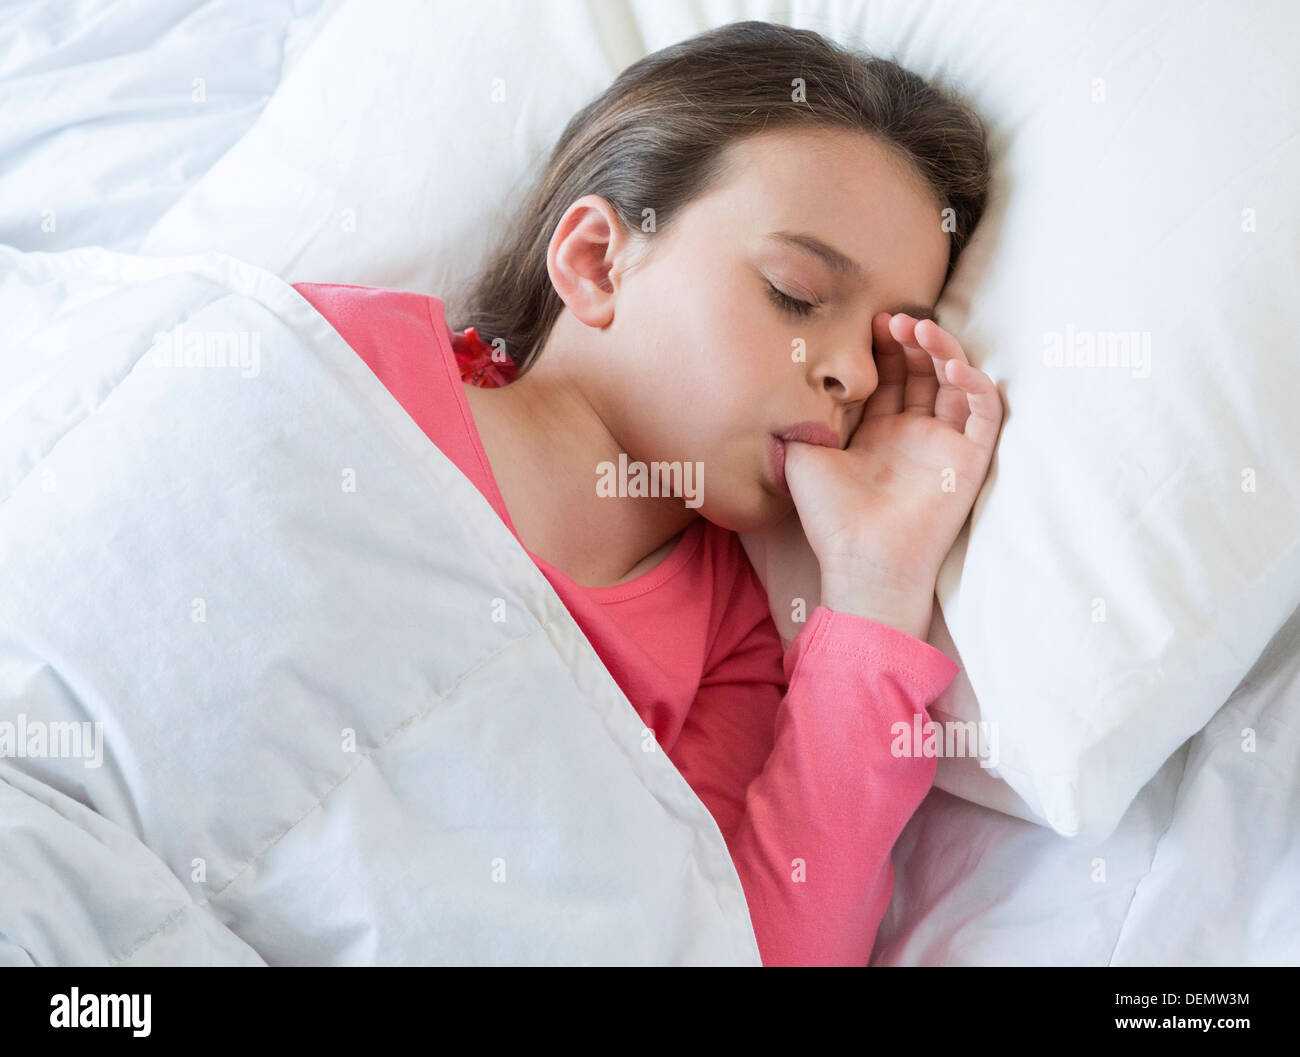 Young Girl Sleeping With Thumb In Mouth Stock Photo 606950